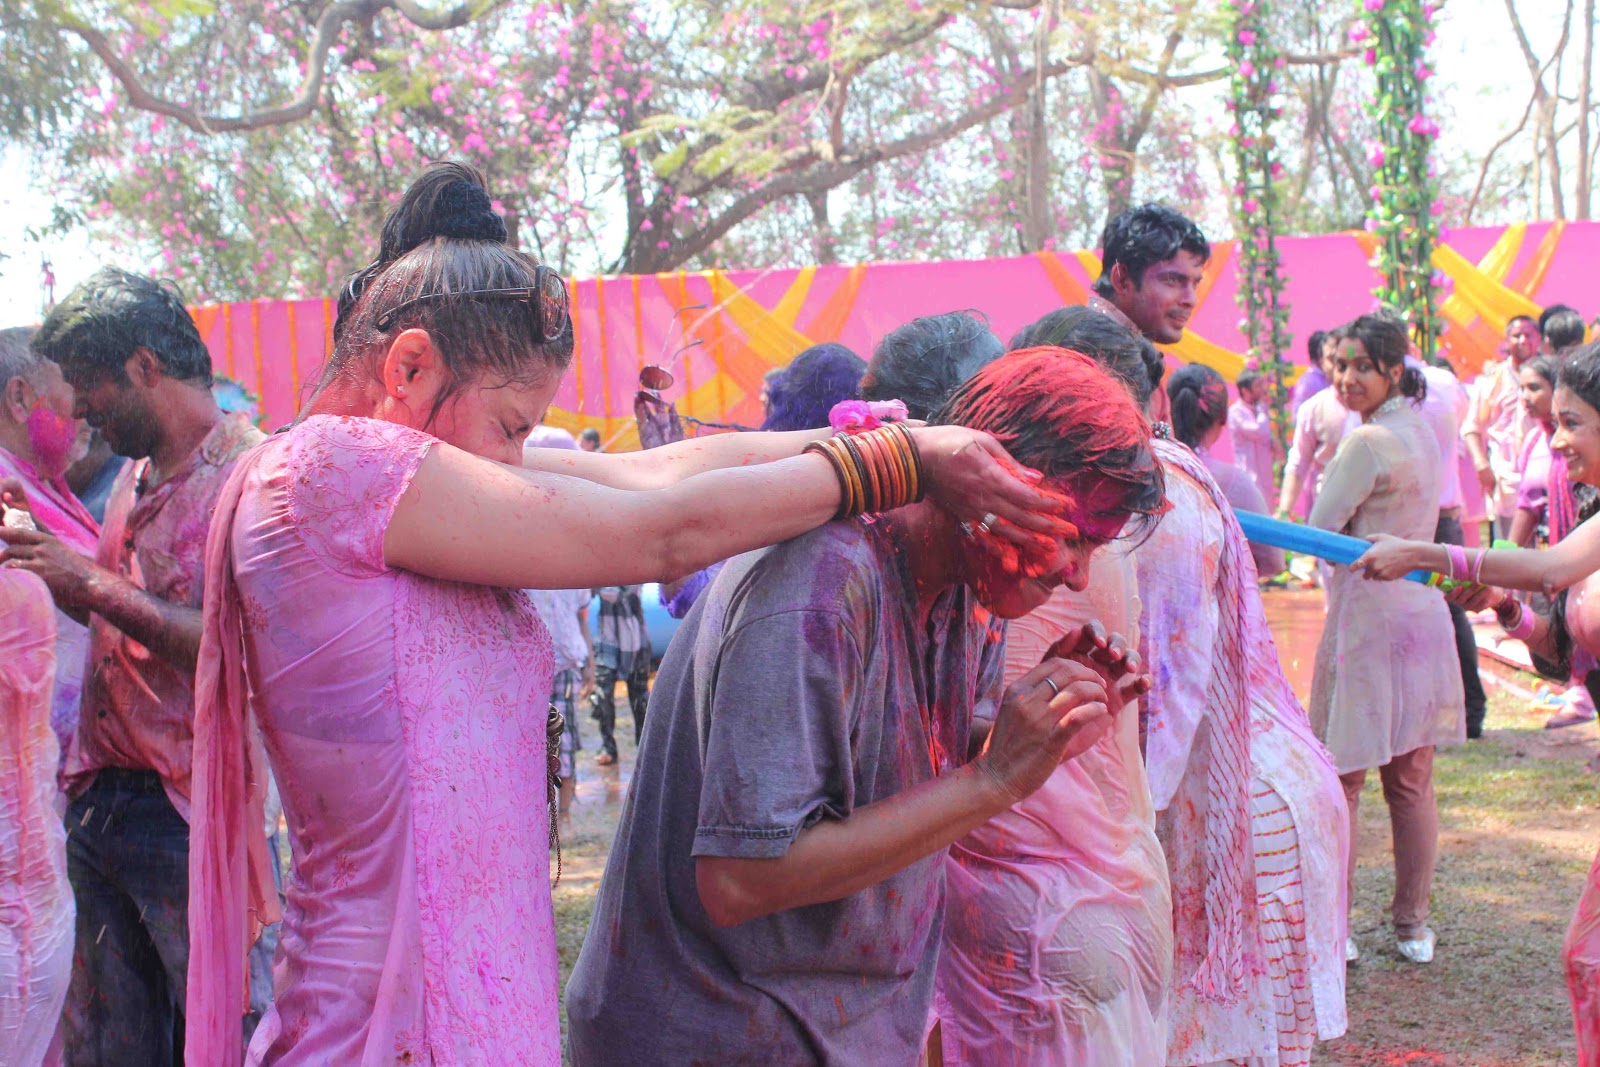 Katrina Kaif Played Holi Was All aAbout Colorful Fun And 